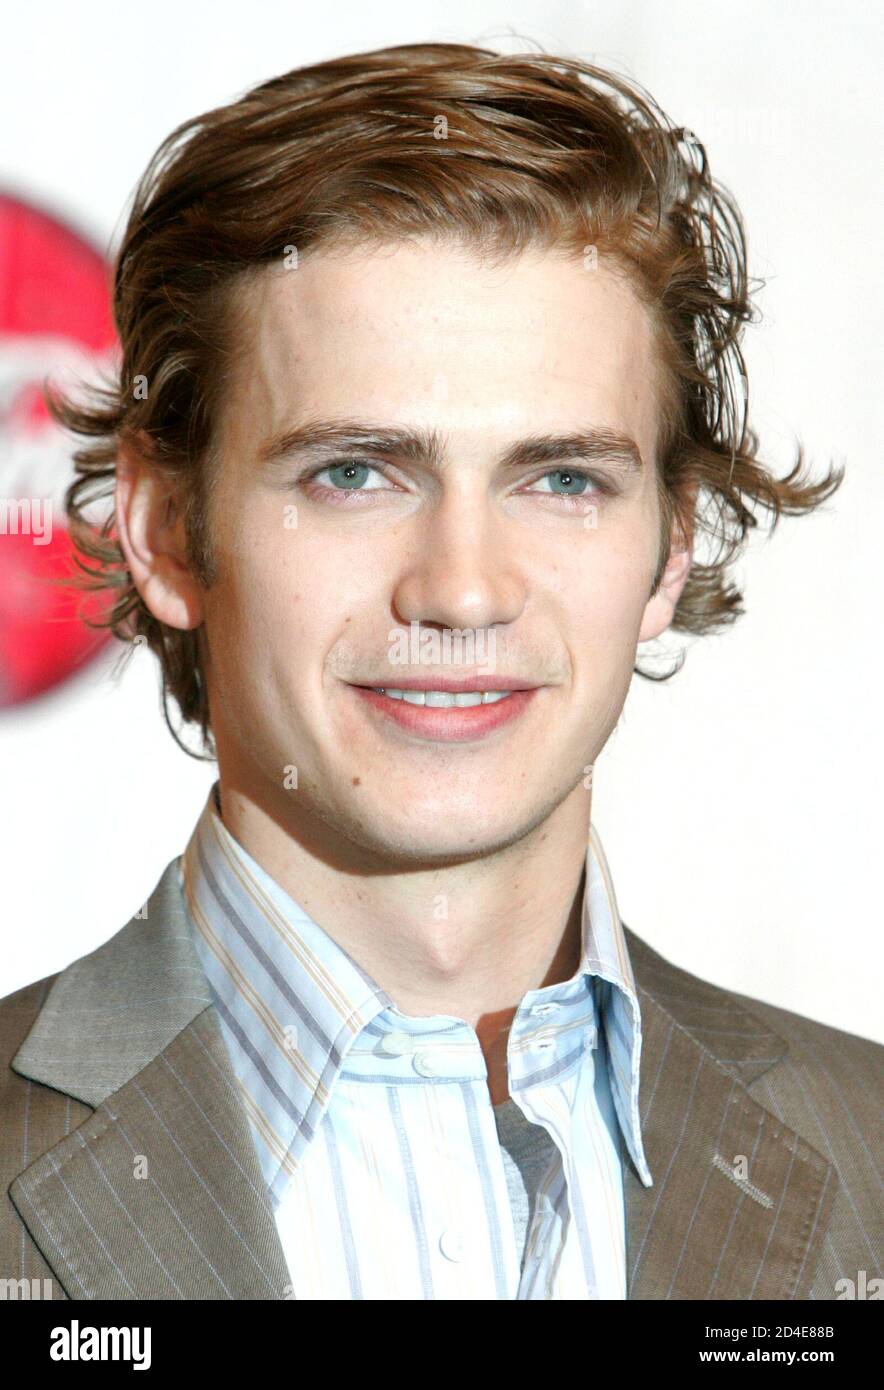 Actor Hayden Christensen arrives at the Paris Las Vegas hotel during ShoWest, the official convention of the National Association of Theatre Owners, March 17, 2005, in Las Vegas, Nevada. Christensen was named Male Star of Tomorrow at ShoWest. Stock Photo